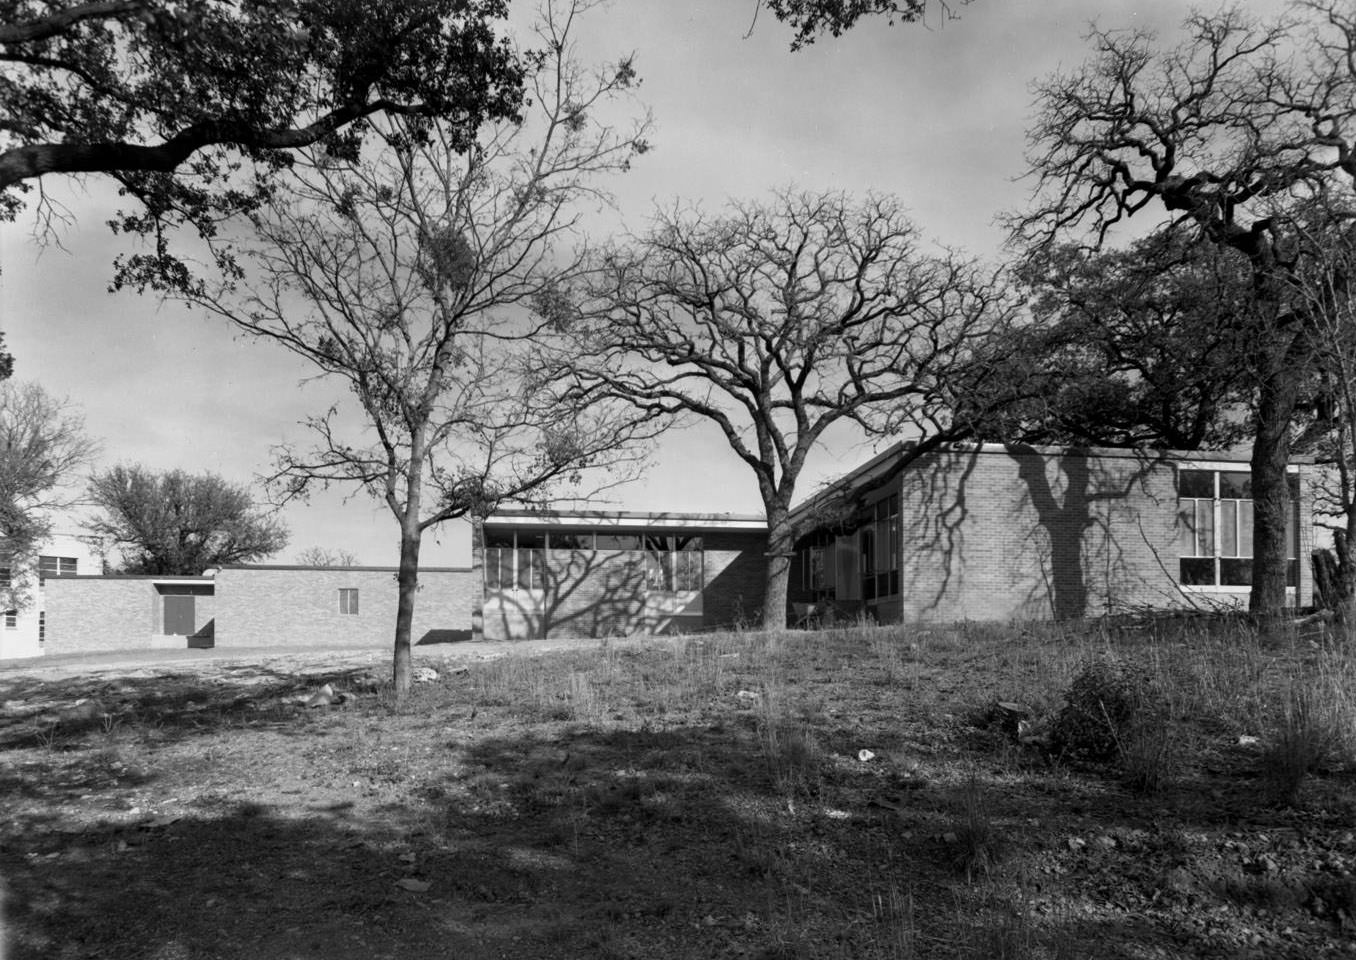 Exterior View of Housing Units at Texas School for the Deaf, 1957.